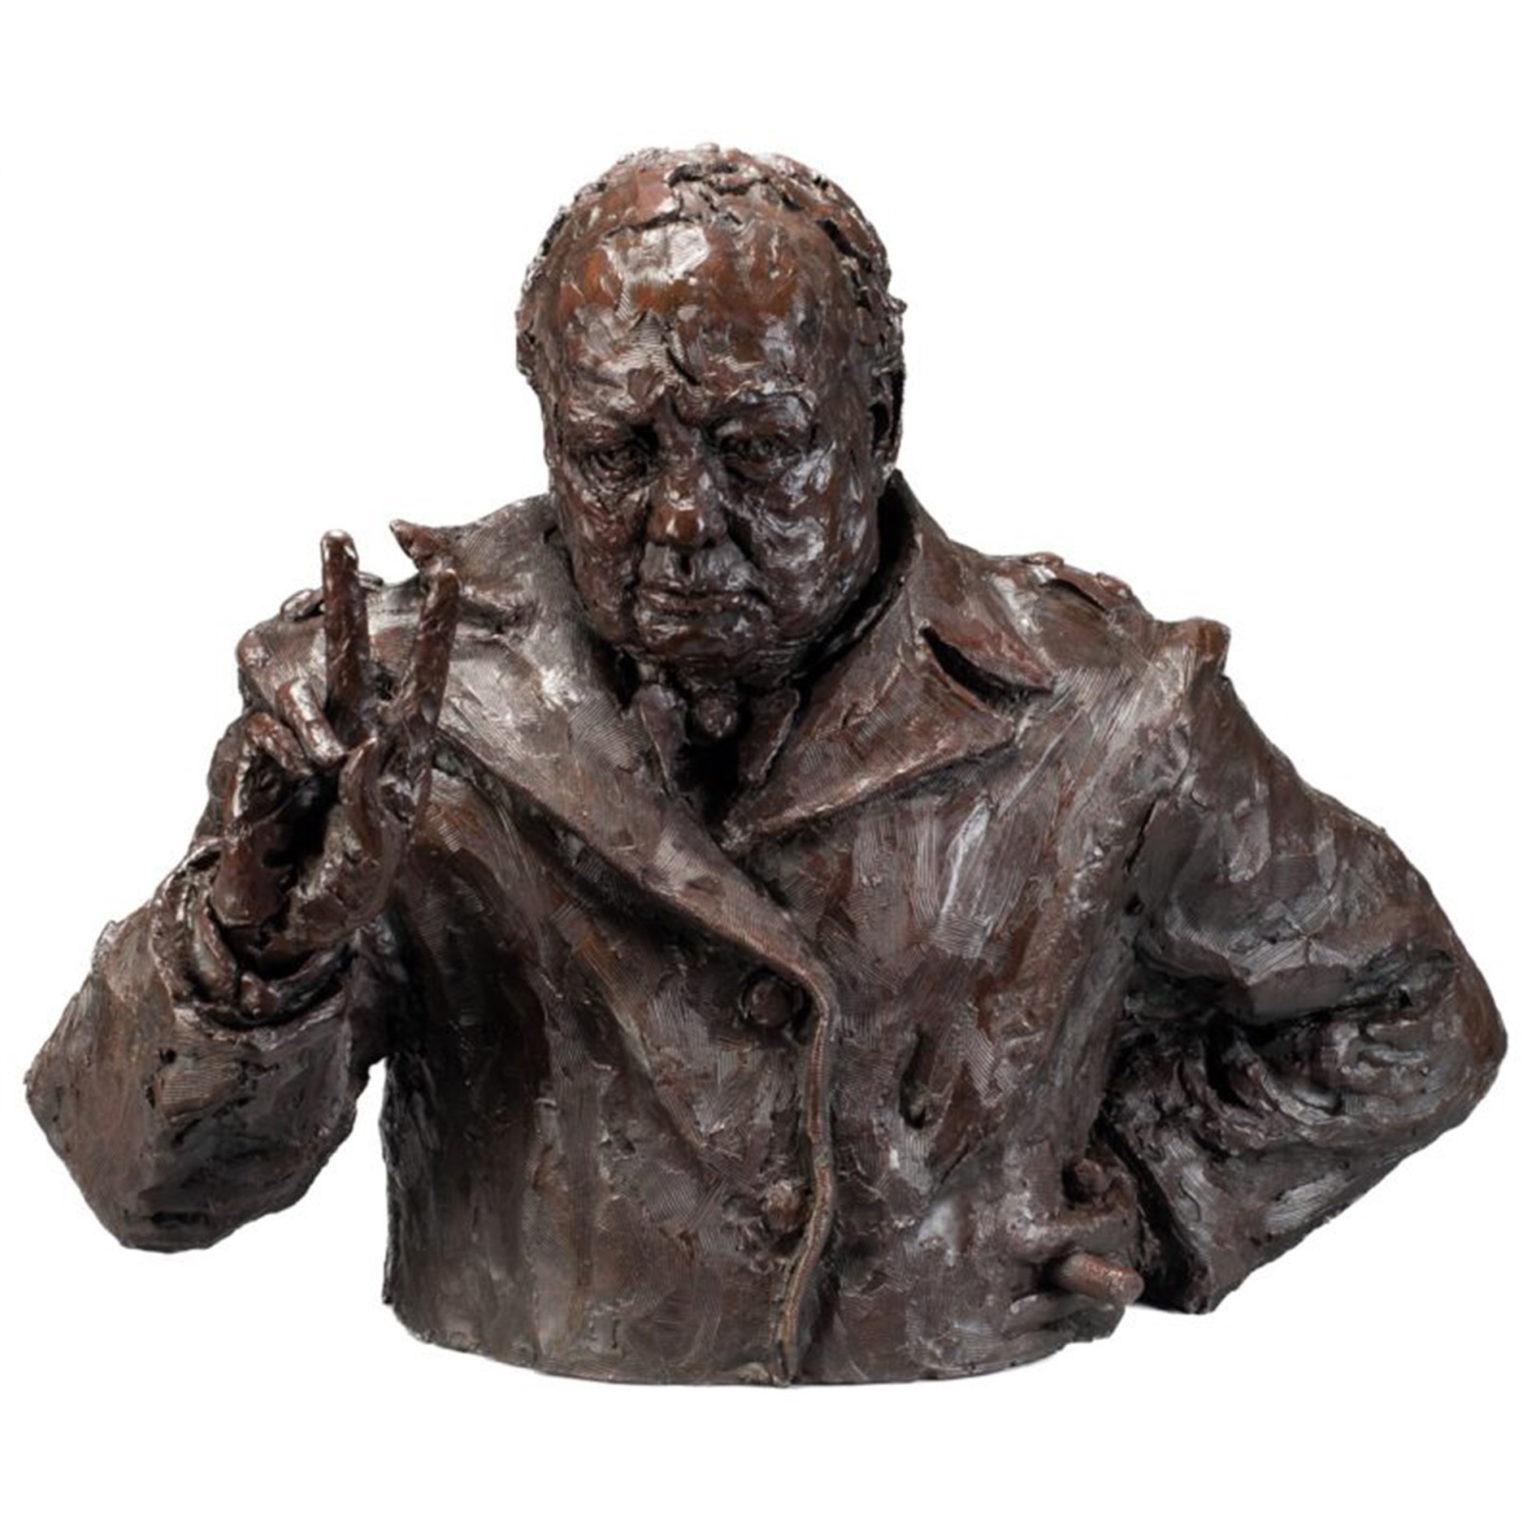 A bronze portrait of Sir Winston Churchill by Rufus Martin, 2023 This head and shoulders bronze bust is instantly recognizable as Sir Winston Churchill.  He is wearing a British Warm greatcoat with epaulettes and has a half-smoked cigar in the left